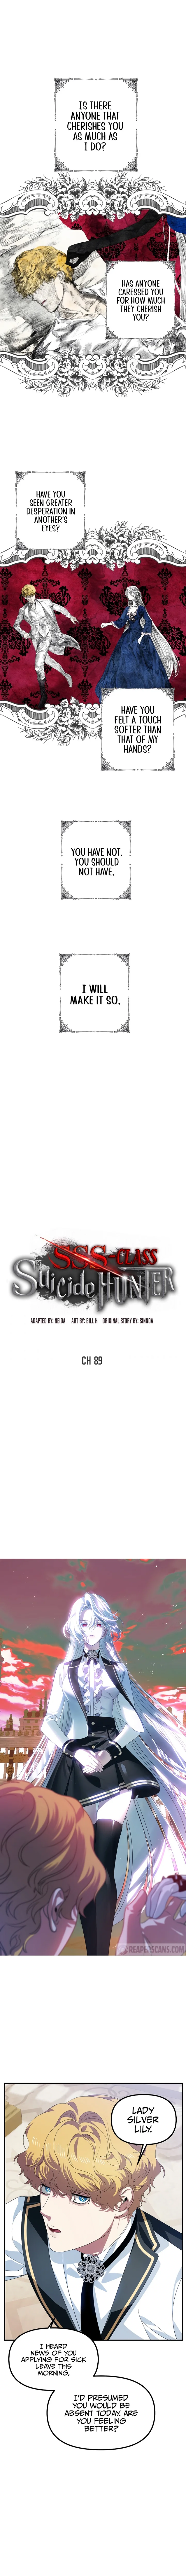 SSS-Class Suicide Hunter - Chapter 89 Page 1